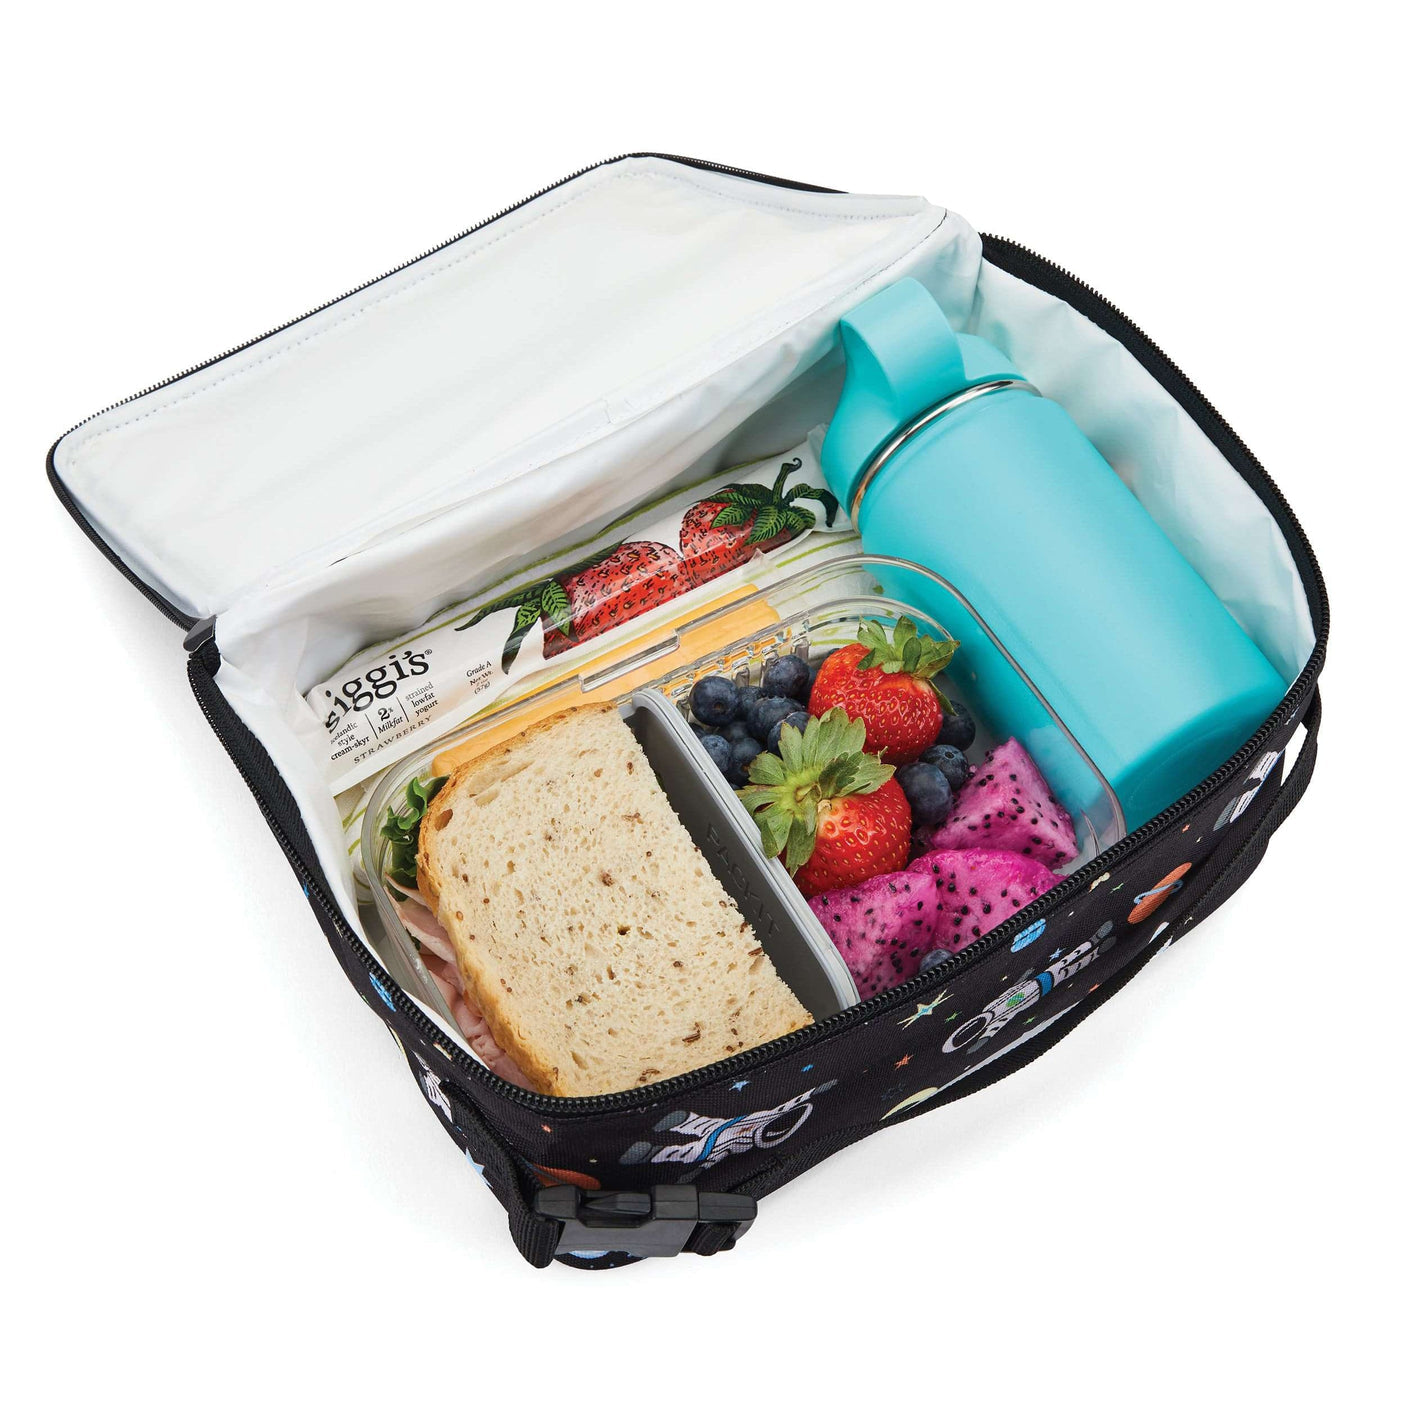 (SALE!) PackIt Freezable Classic Lunch Box